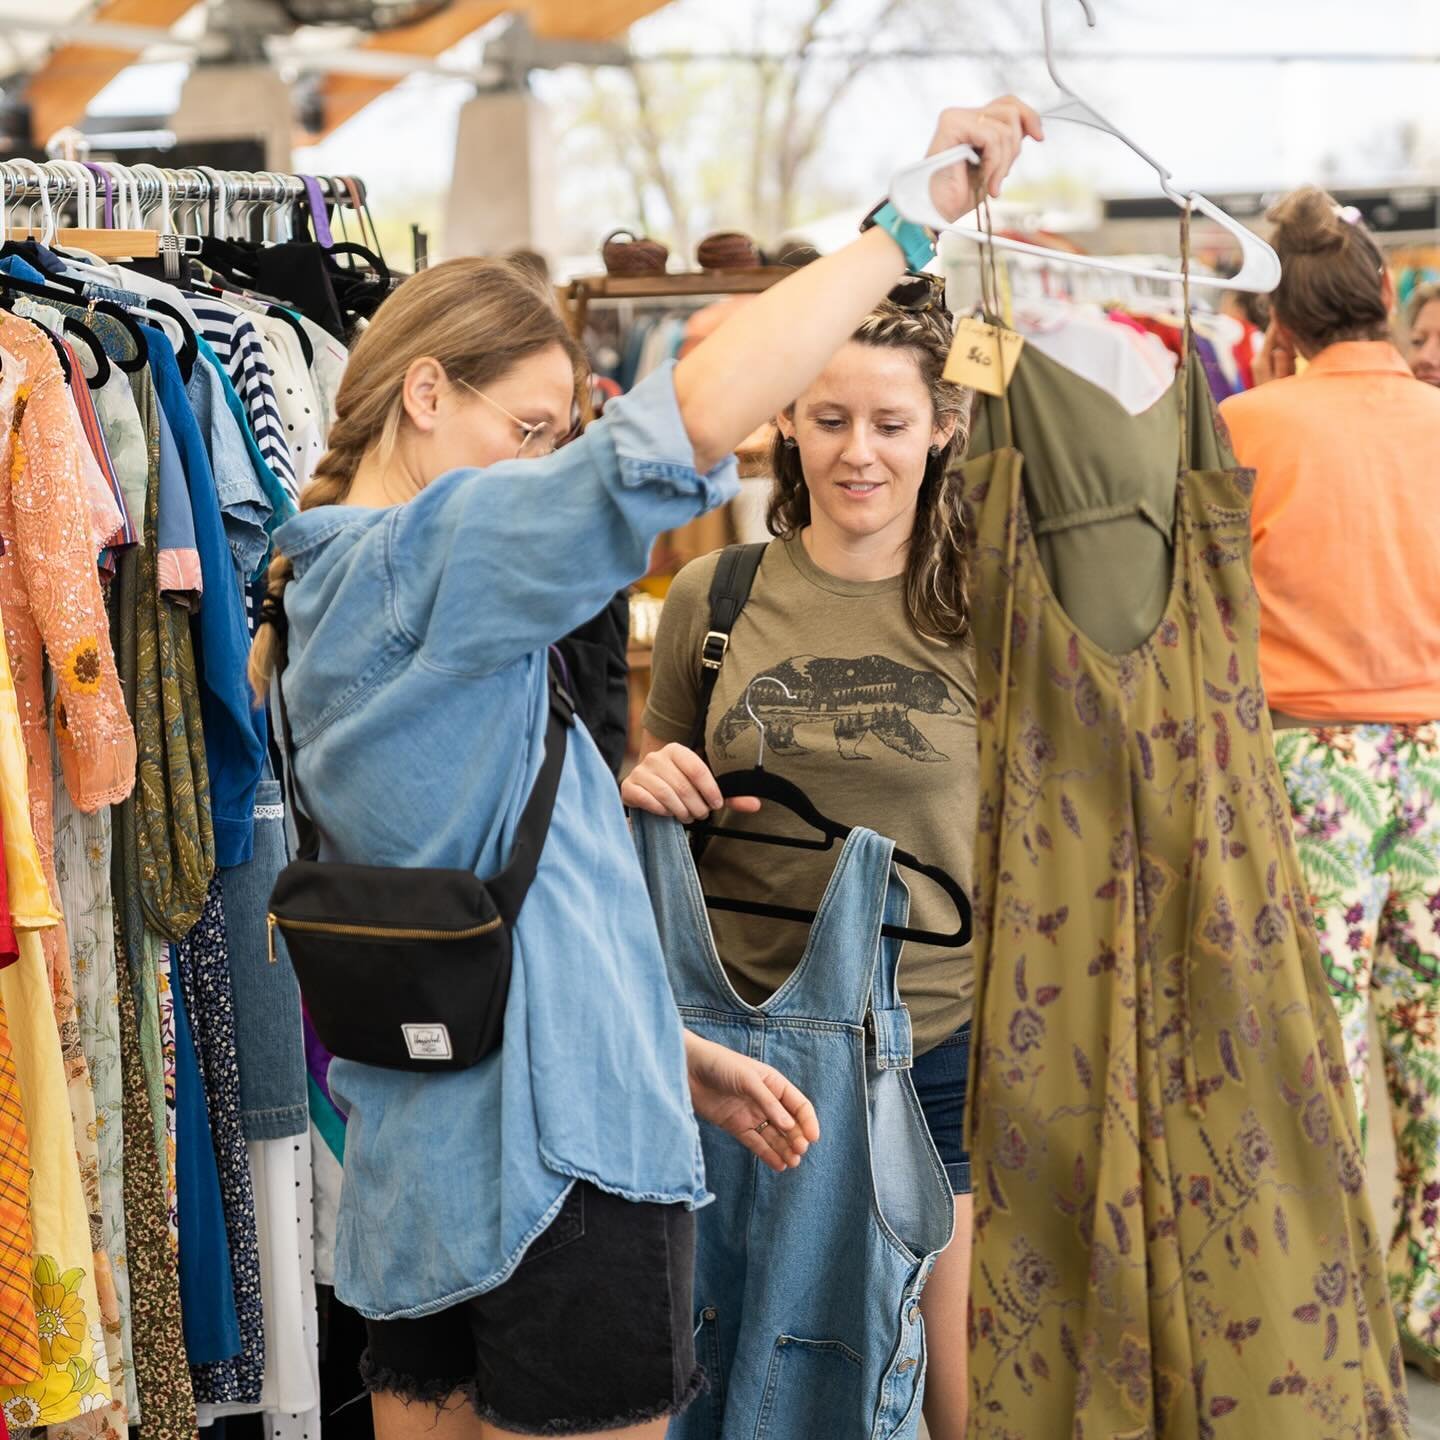 Spoiler alert ✨The early bird snags the BEST vintage treasures! 

Register now for a $10 early bird 🎟️ticket for the Mpls Vintage 🛍️Market @stlouispark ROC! We can&rsquo;t wait to see all of you THIS Saturday, May 11th from 11 AM - 4 PM. Plus you&r